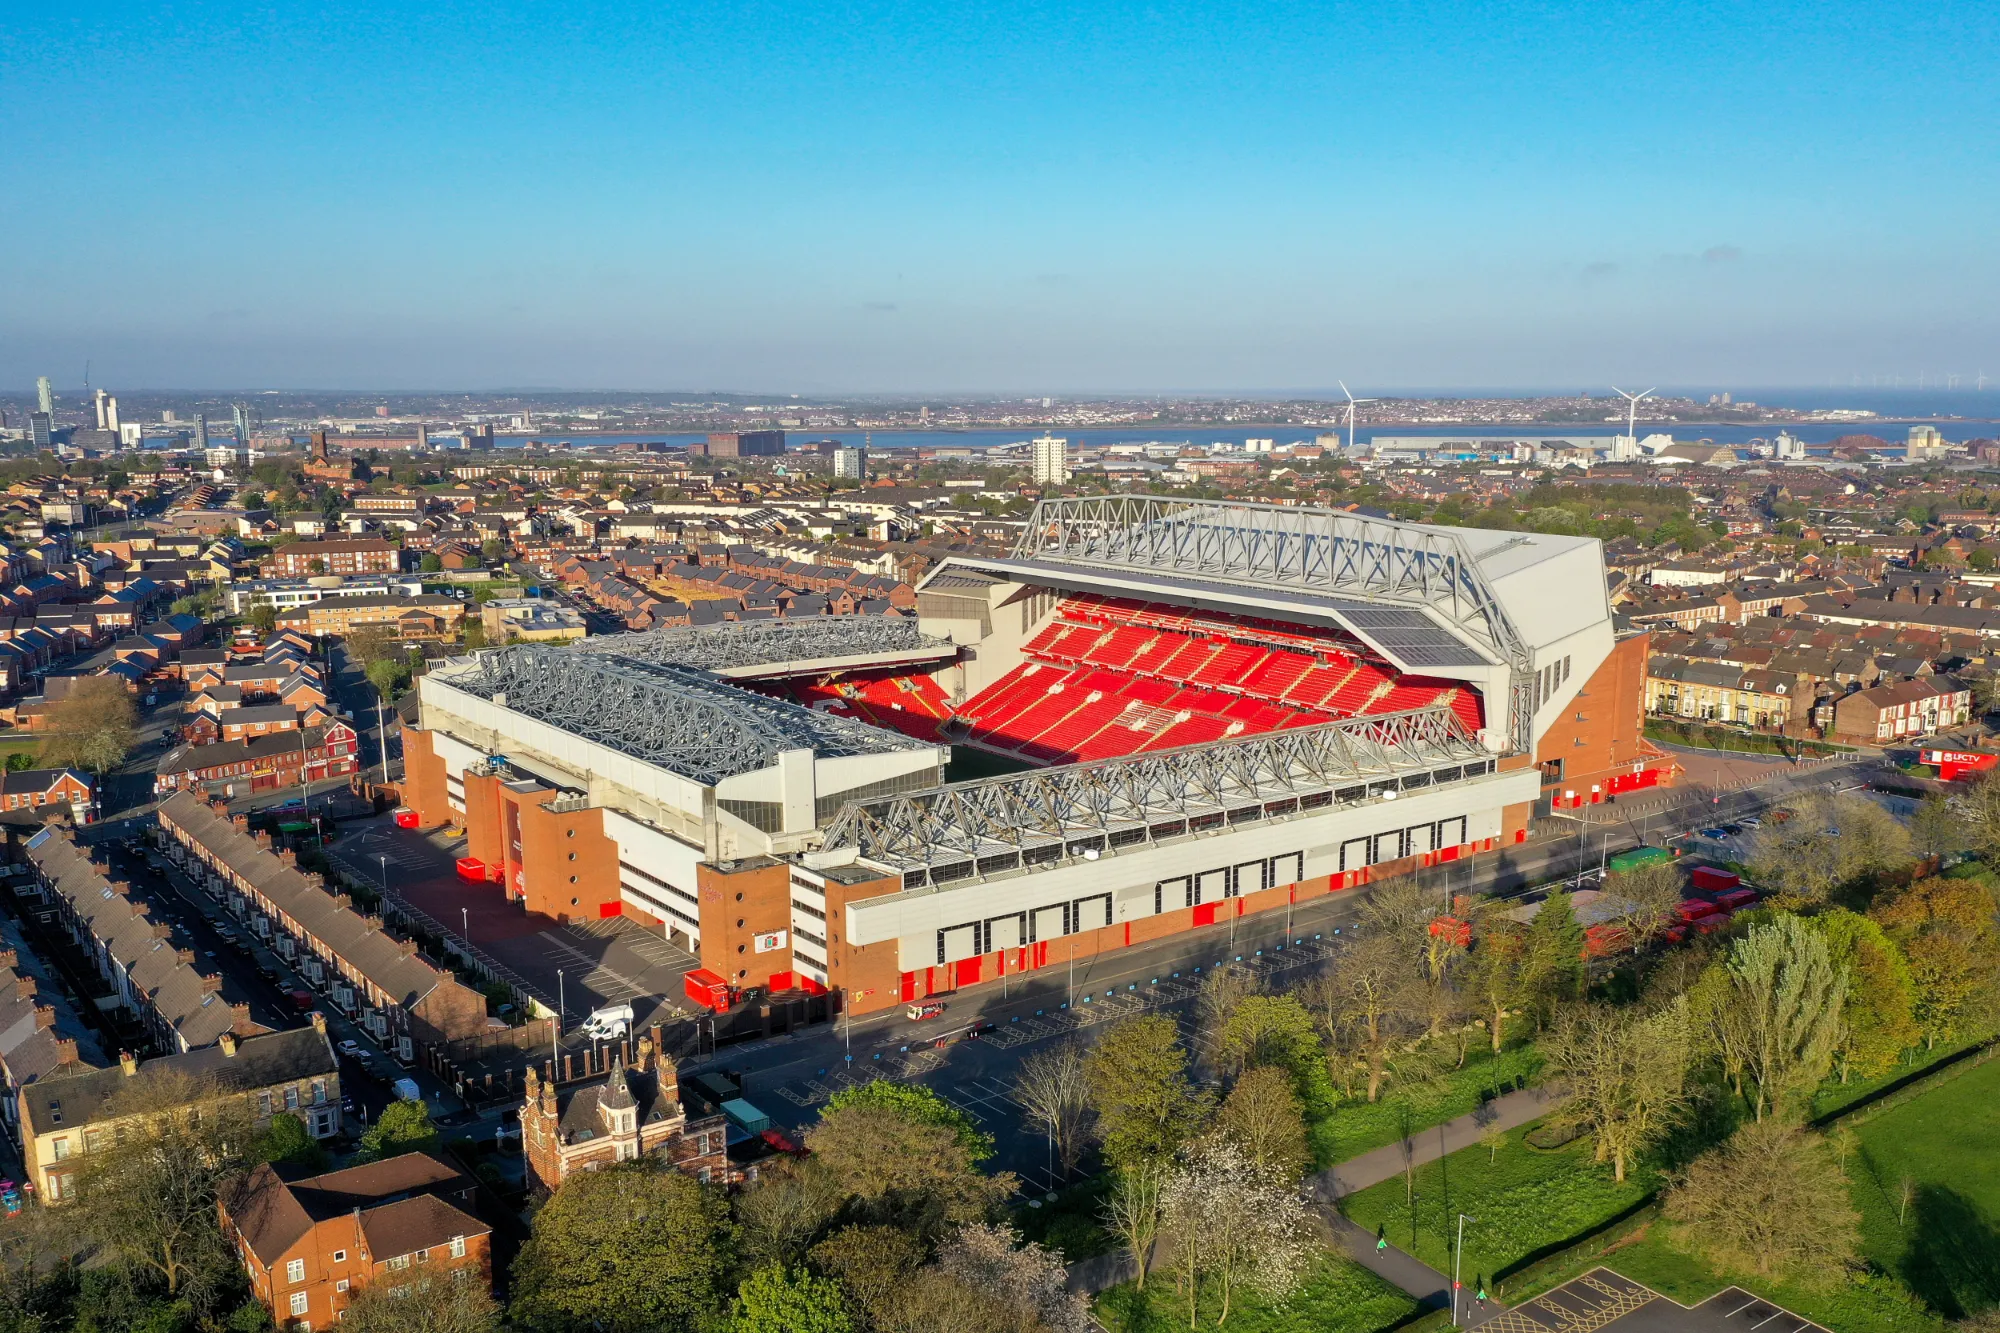 Anfield - What is the area like